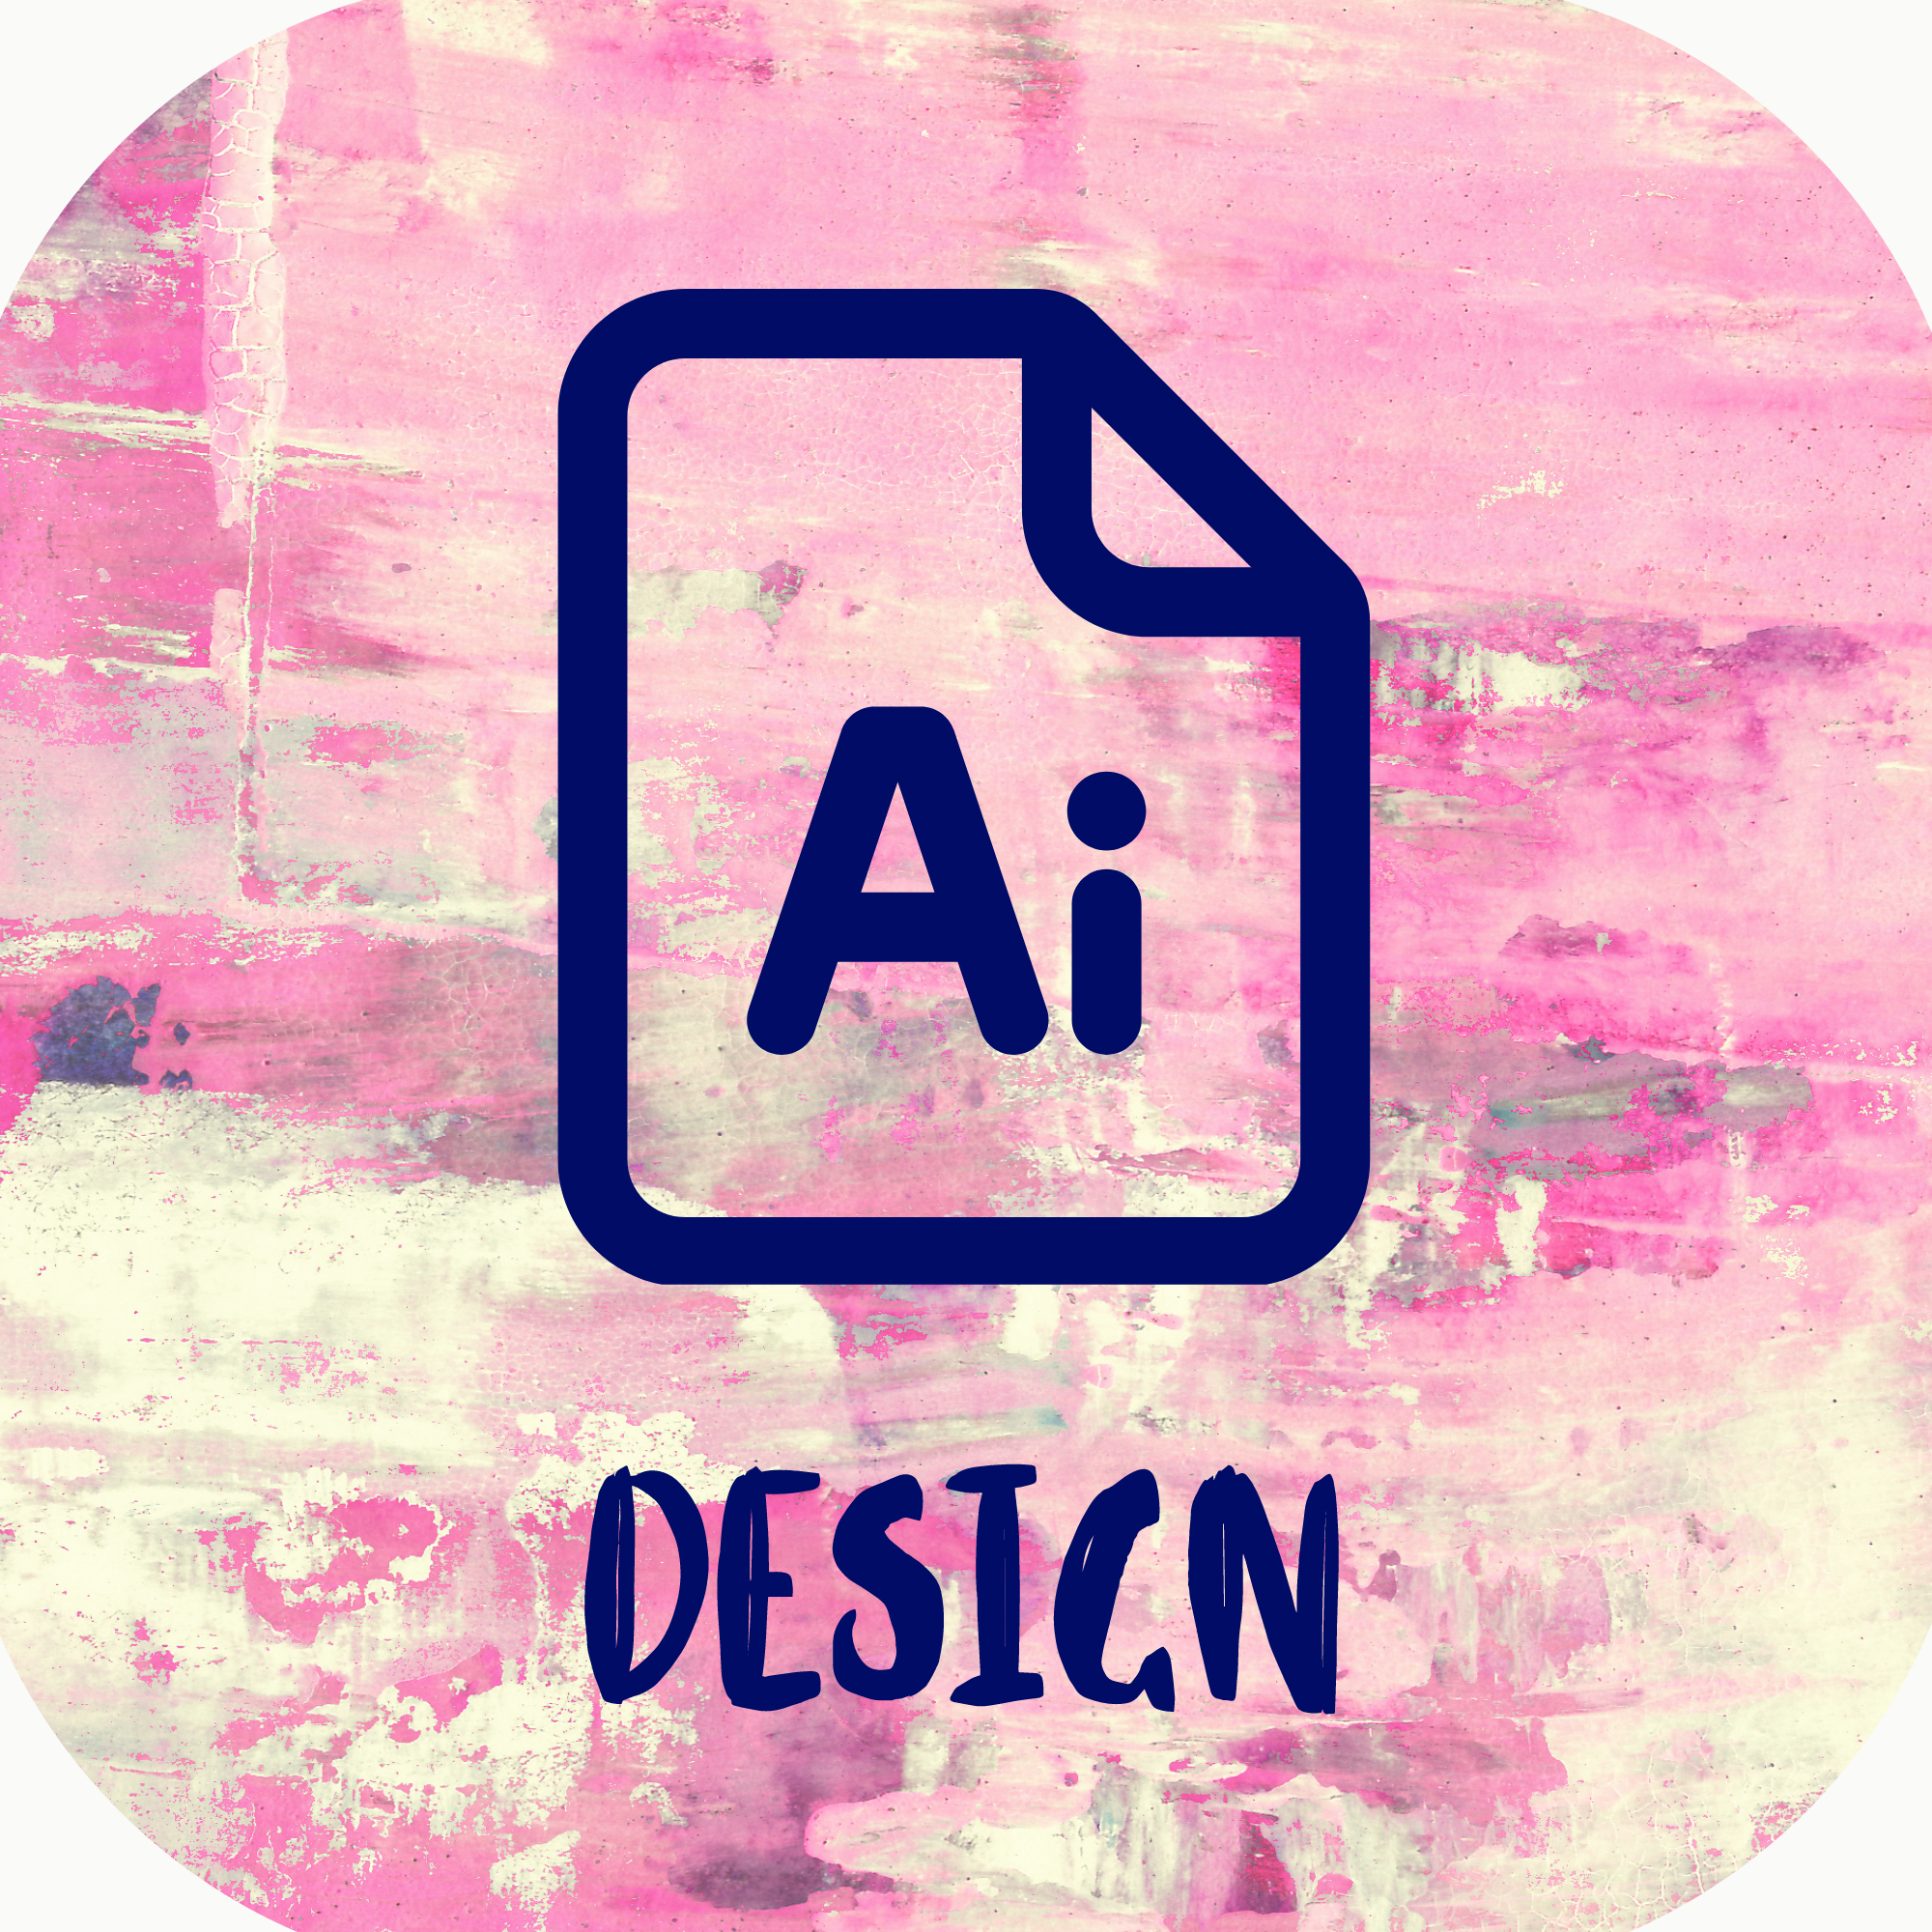 Design icon with a pink, beige, and navy blue paint brushed background and the Adobe Indesign logo inside reading Design below the icon. The icon leads users to Ava's design portfolio